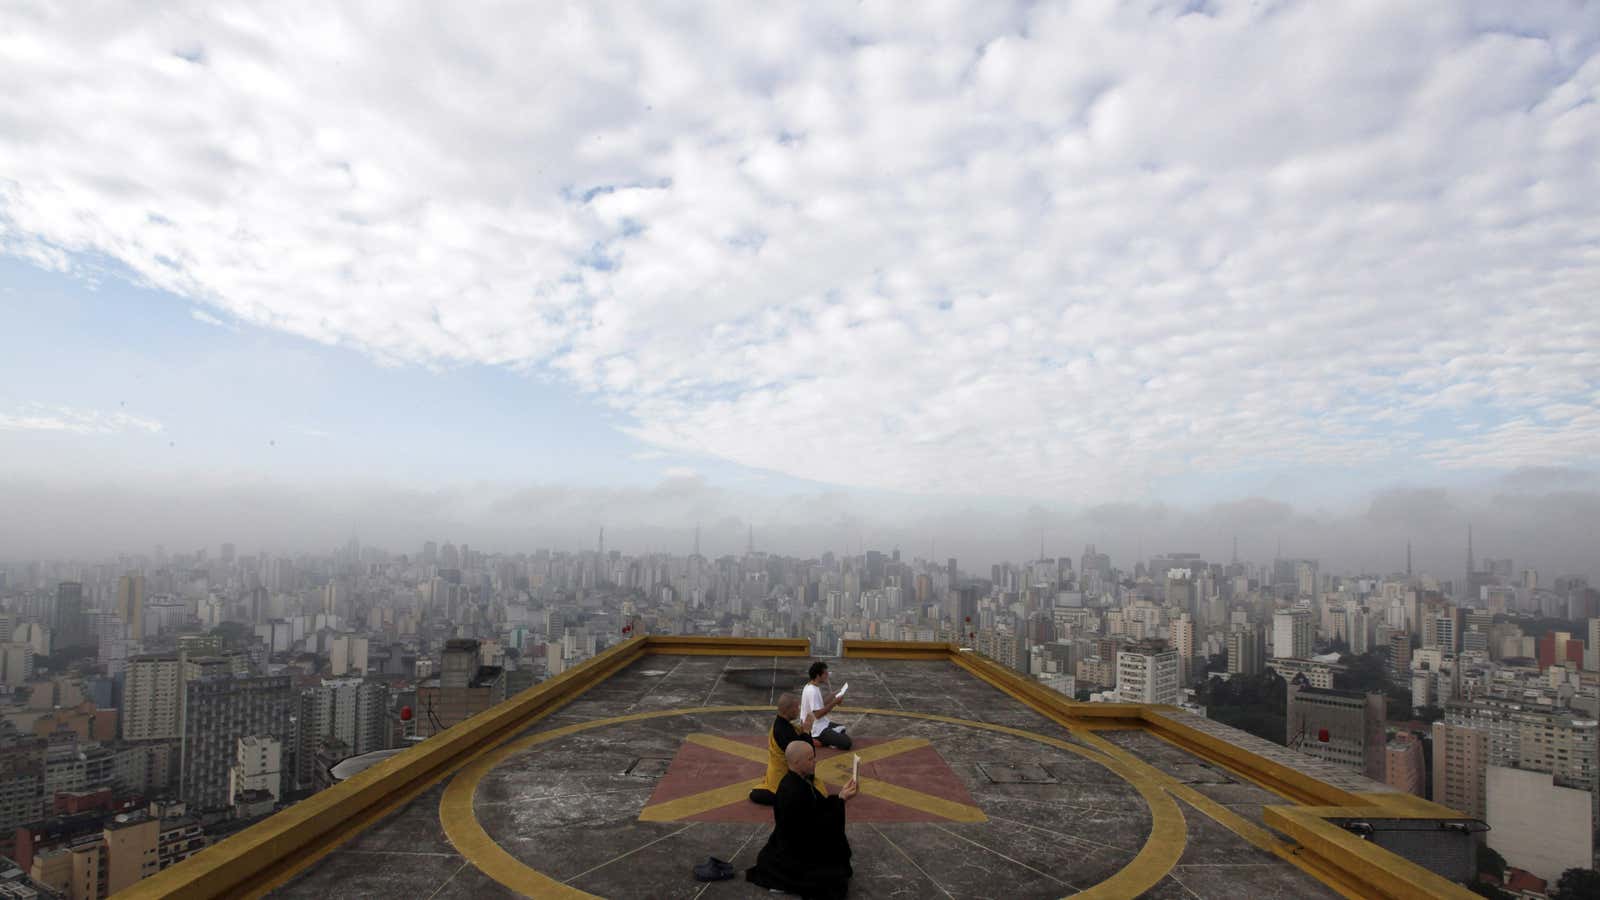 Buddhist monks Seigen, Jisho and Costa meditate on the helipad of Copan building in downtown Sao Paulo.